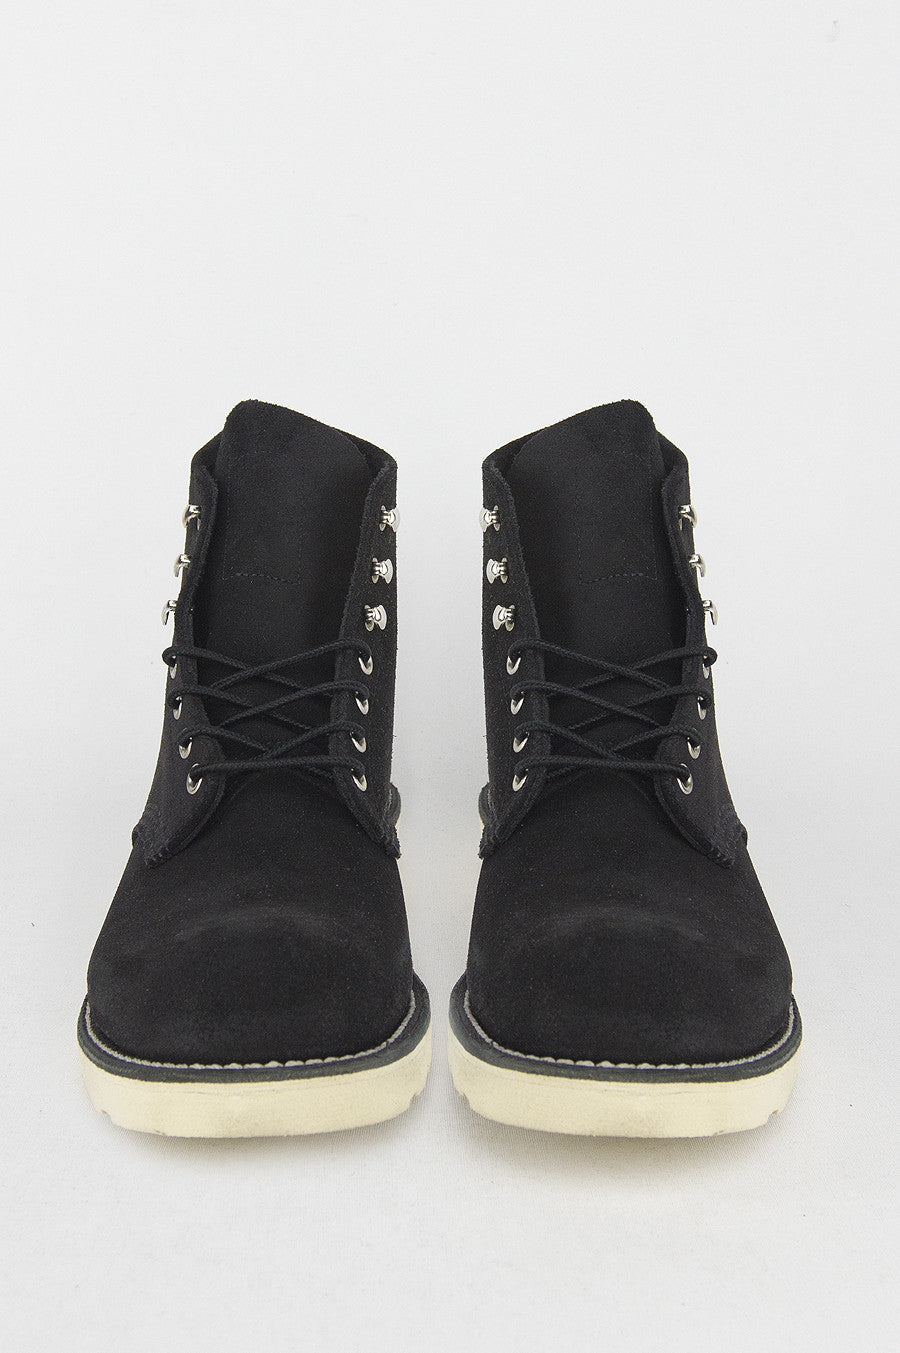 BLENDS X RED WING 6" ROUND TOE BLACK SUEDE - BLENDS